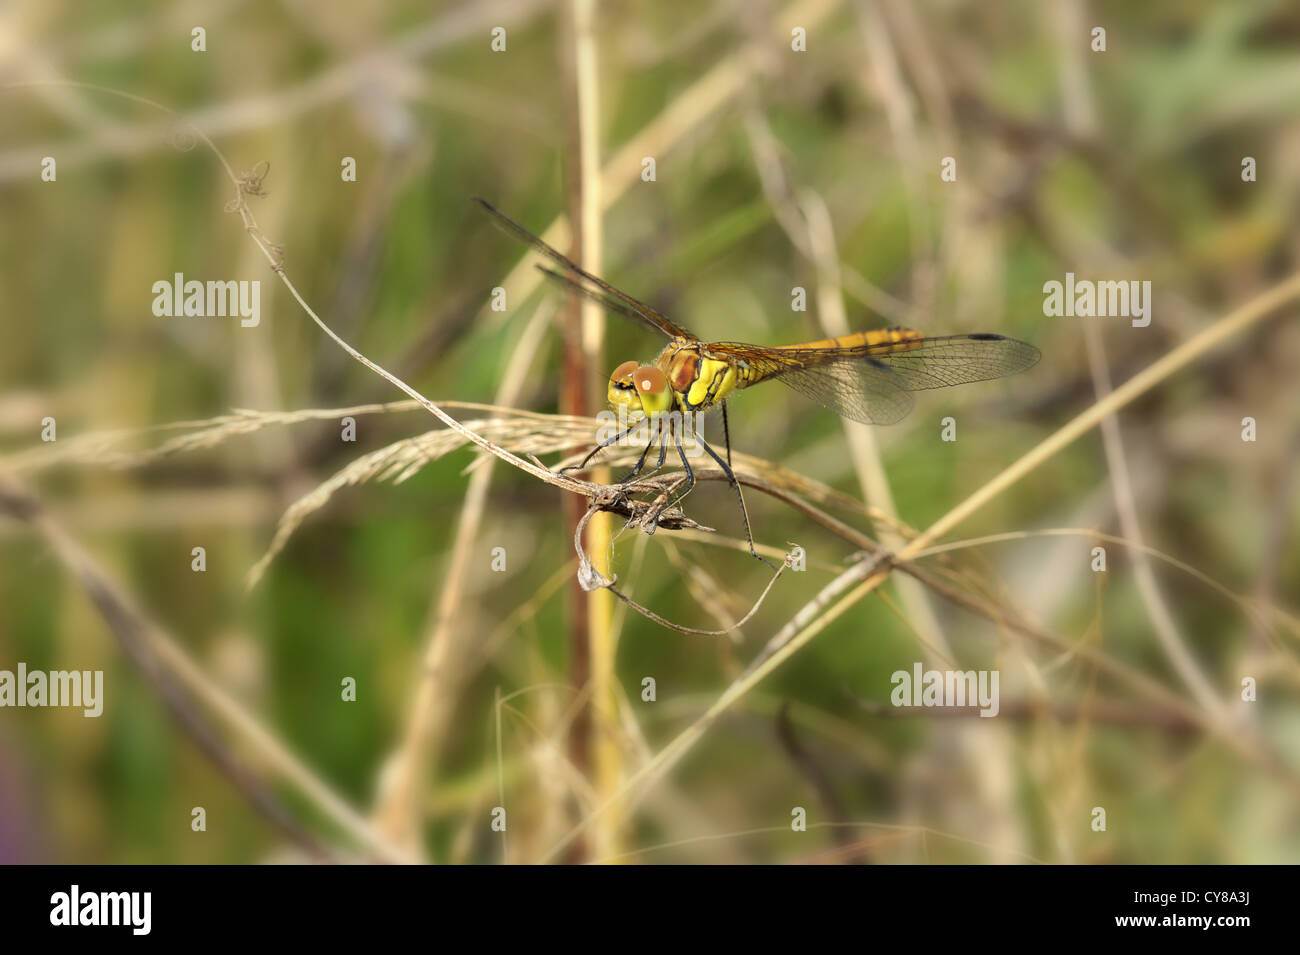 a close up of a yellow and brown dragonfly on a branch Stock Photo